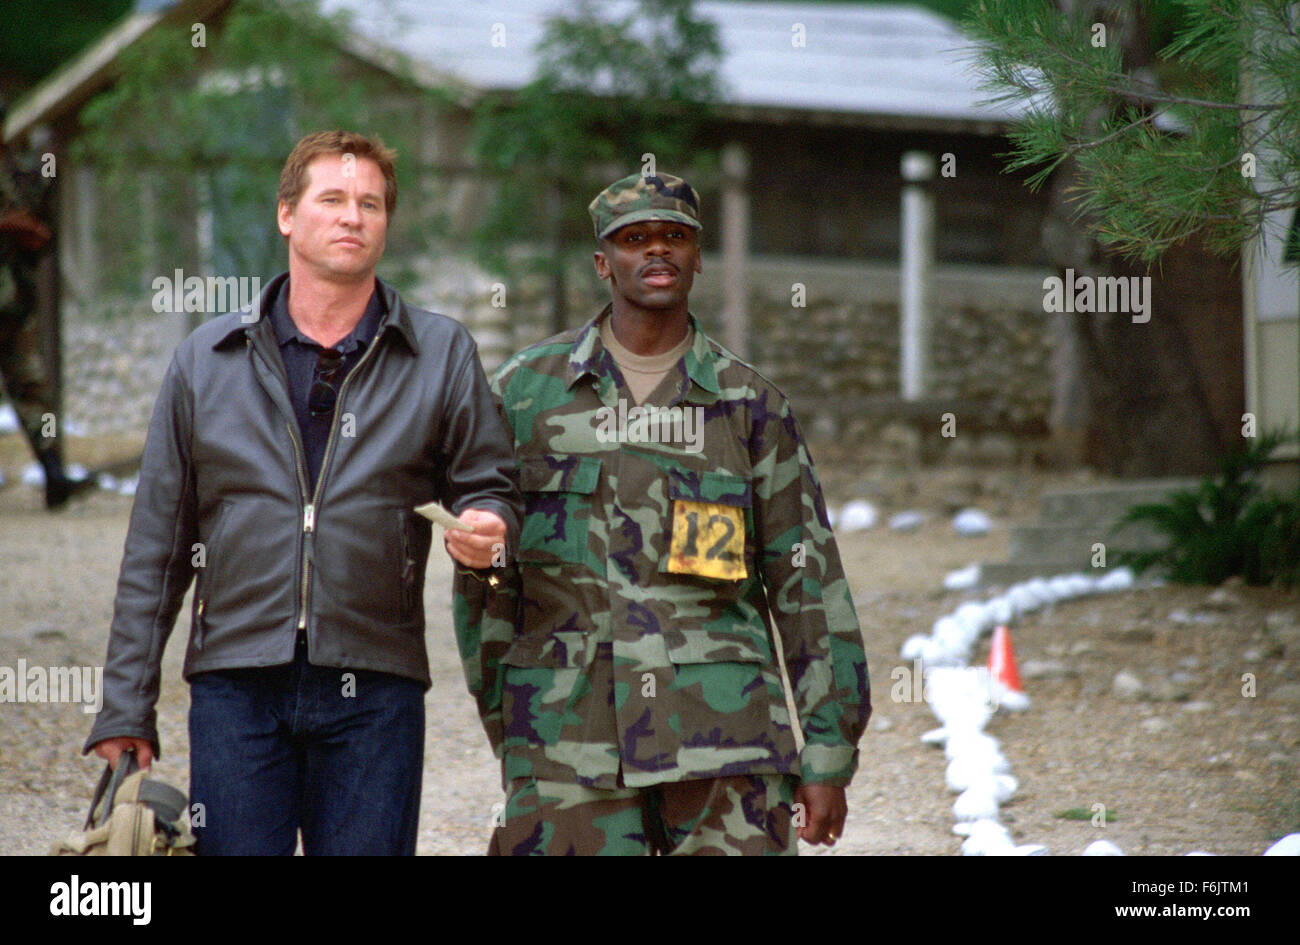 RELEASE DATE: March 12, 2004. MOVIE TITLE: Spartan. STUDIO: ApolloMedia. PLOT: The investigation into a kidnapping of the daughter of a high-ranking US government official. PICTURED: VAL KILMER as Scott and DEREK LUKE as Curtis. Stock Photo